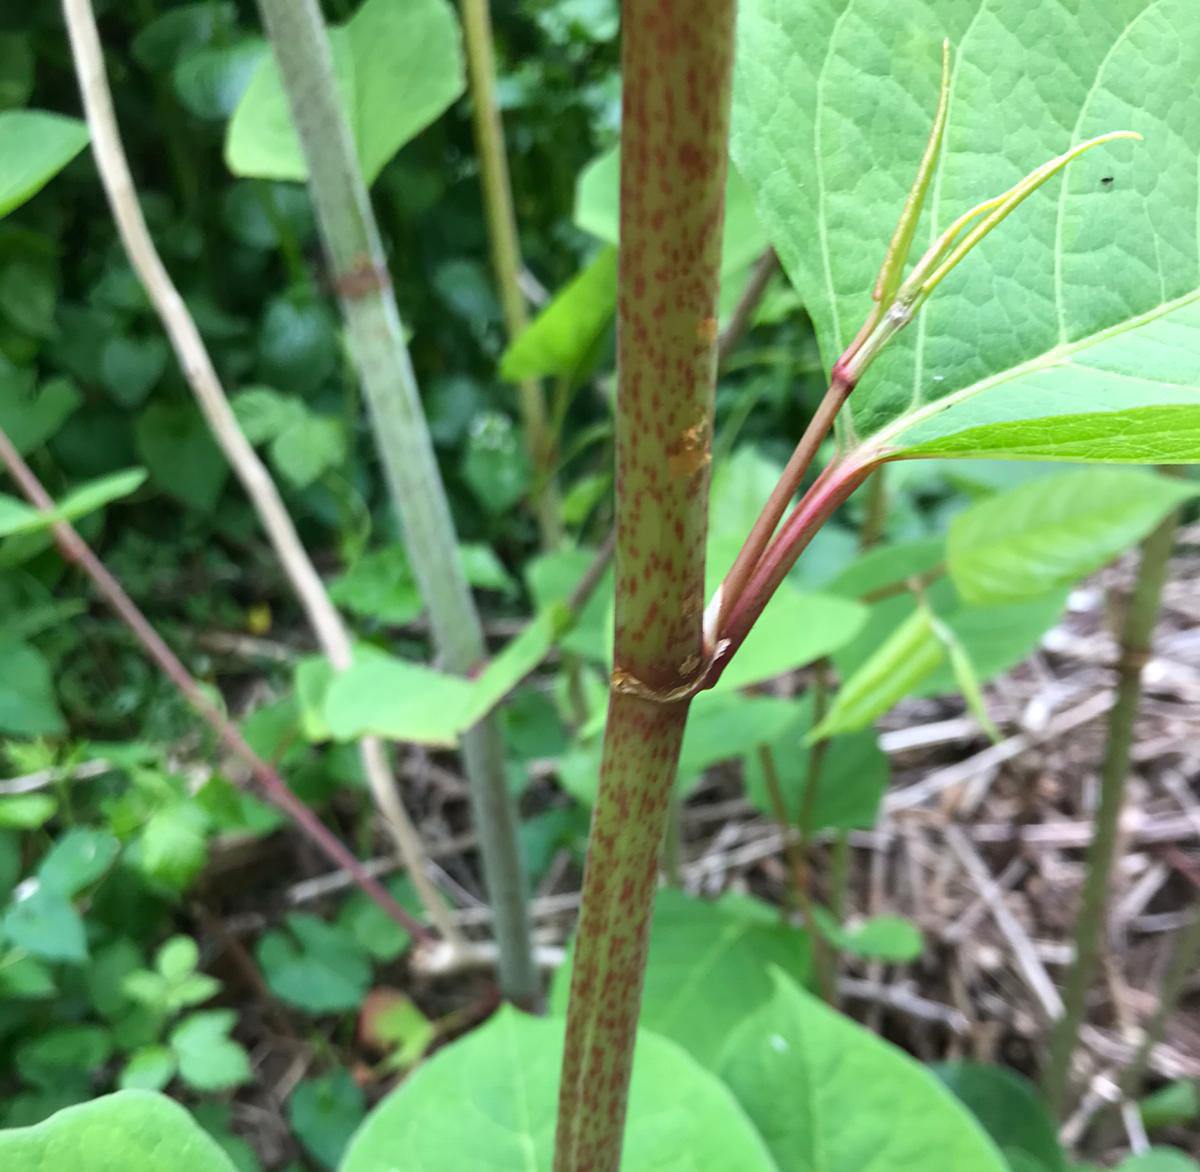 Close up view of purple speckled stem. The stem becomes white with purple speckles in the summer months. Image courtesy of Hazel Reading and Chris Holborow.